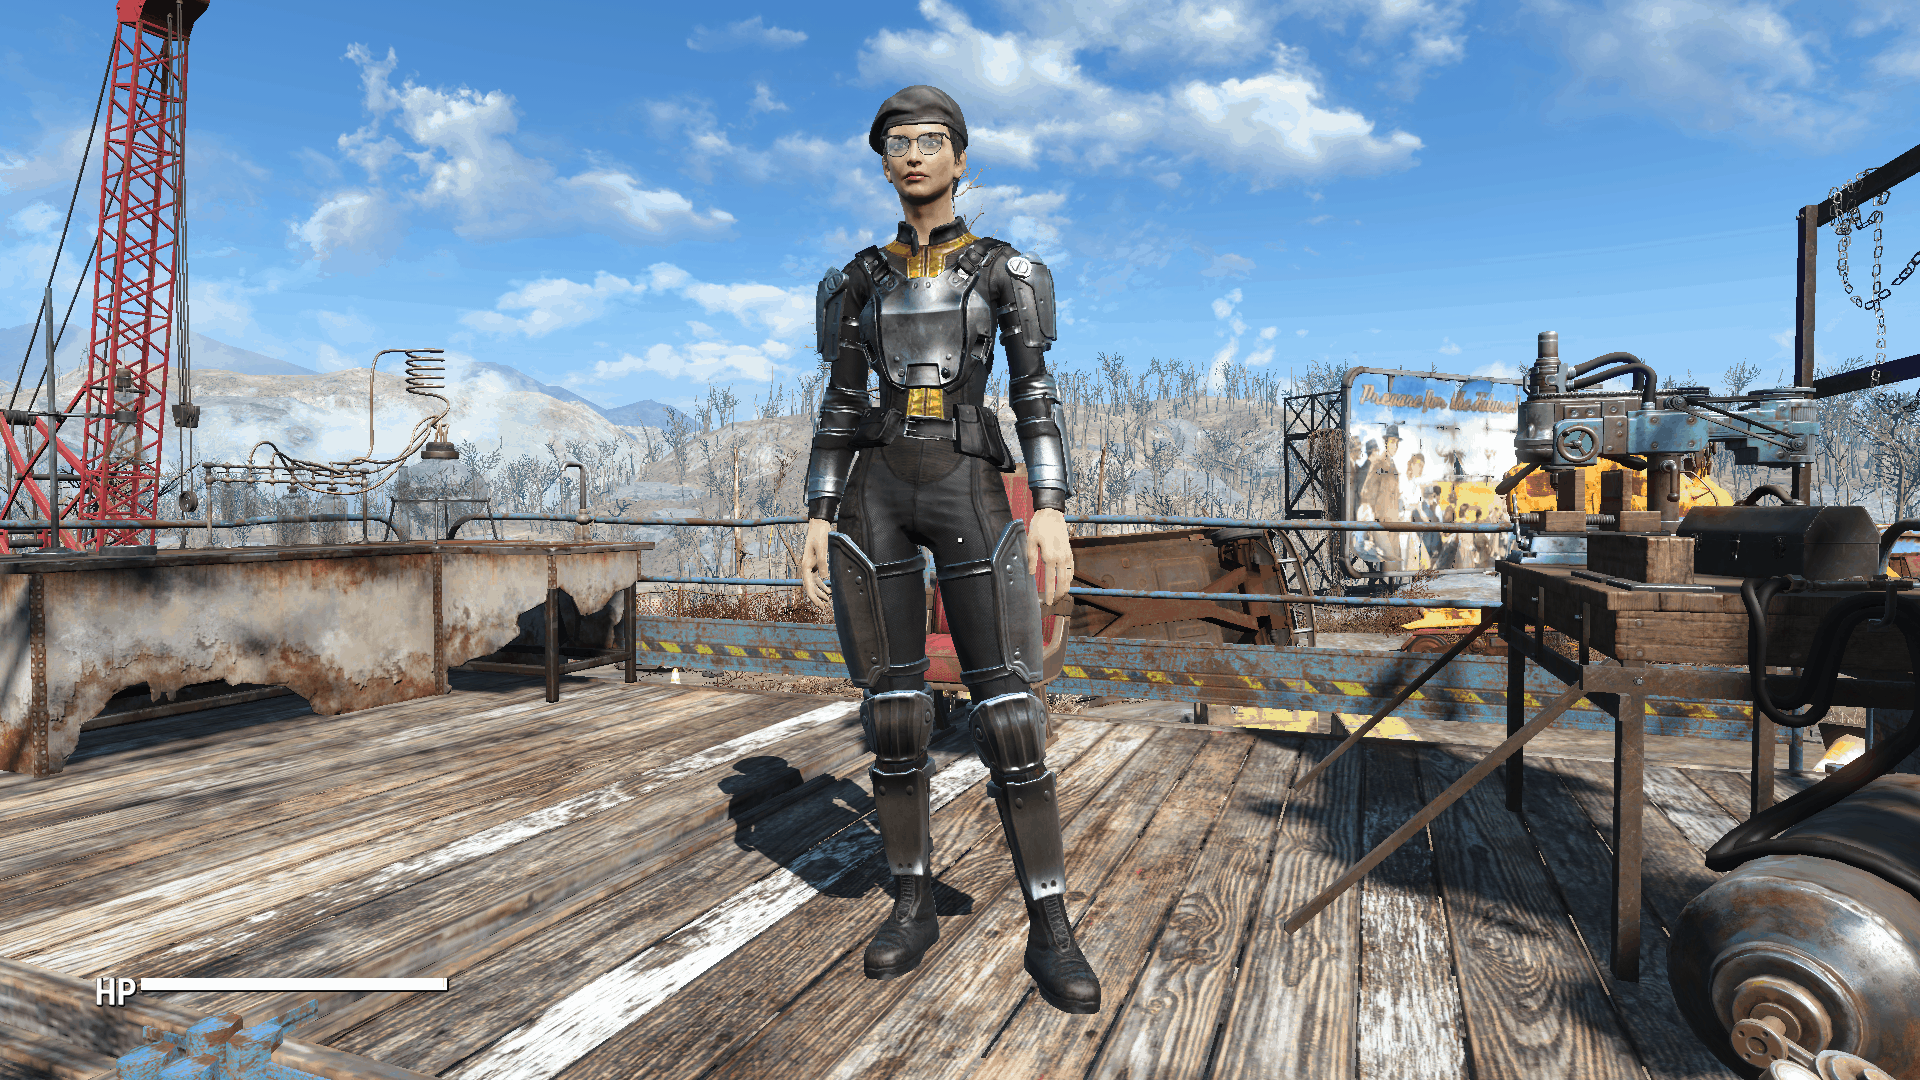 Building stores in fallout 4 фото 57